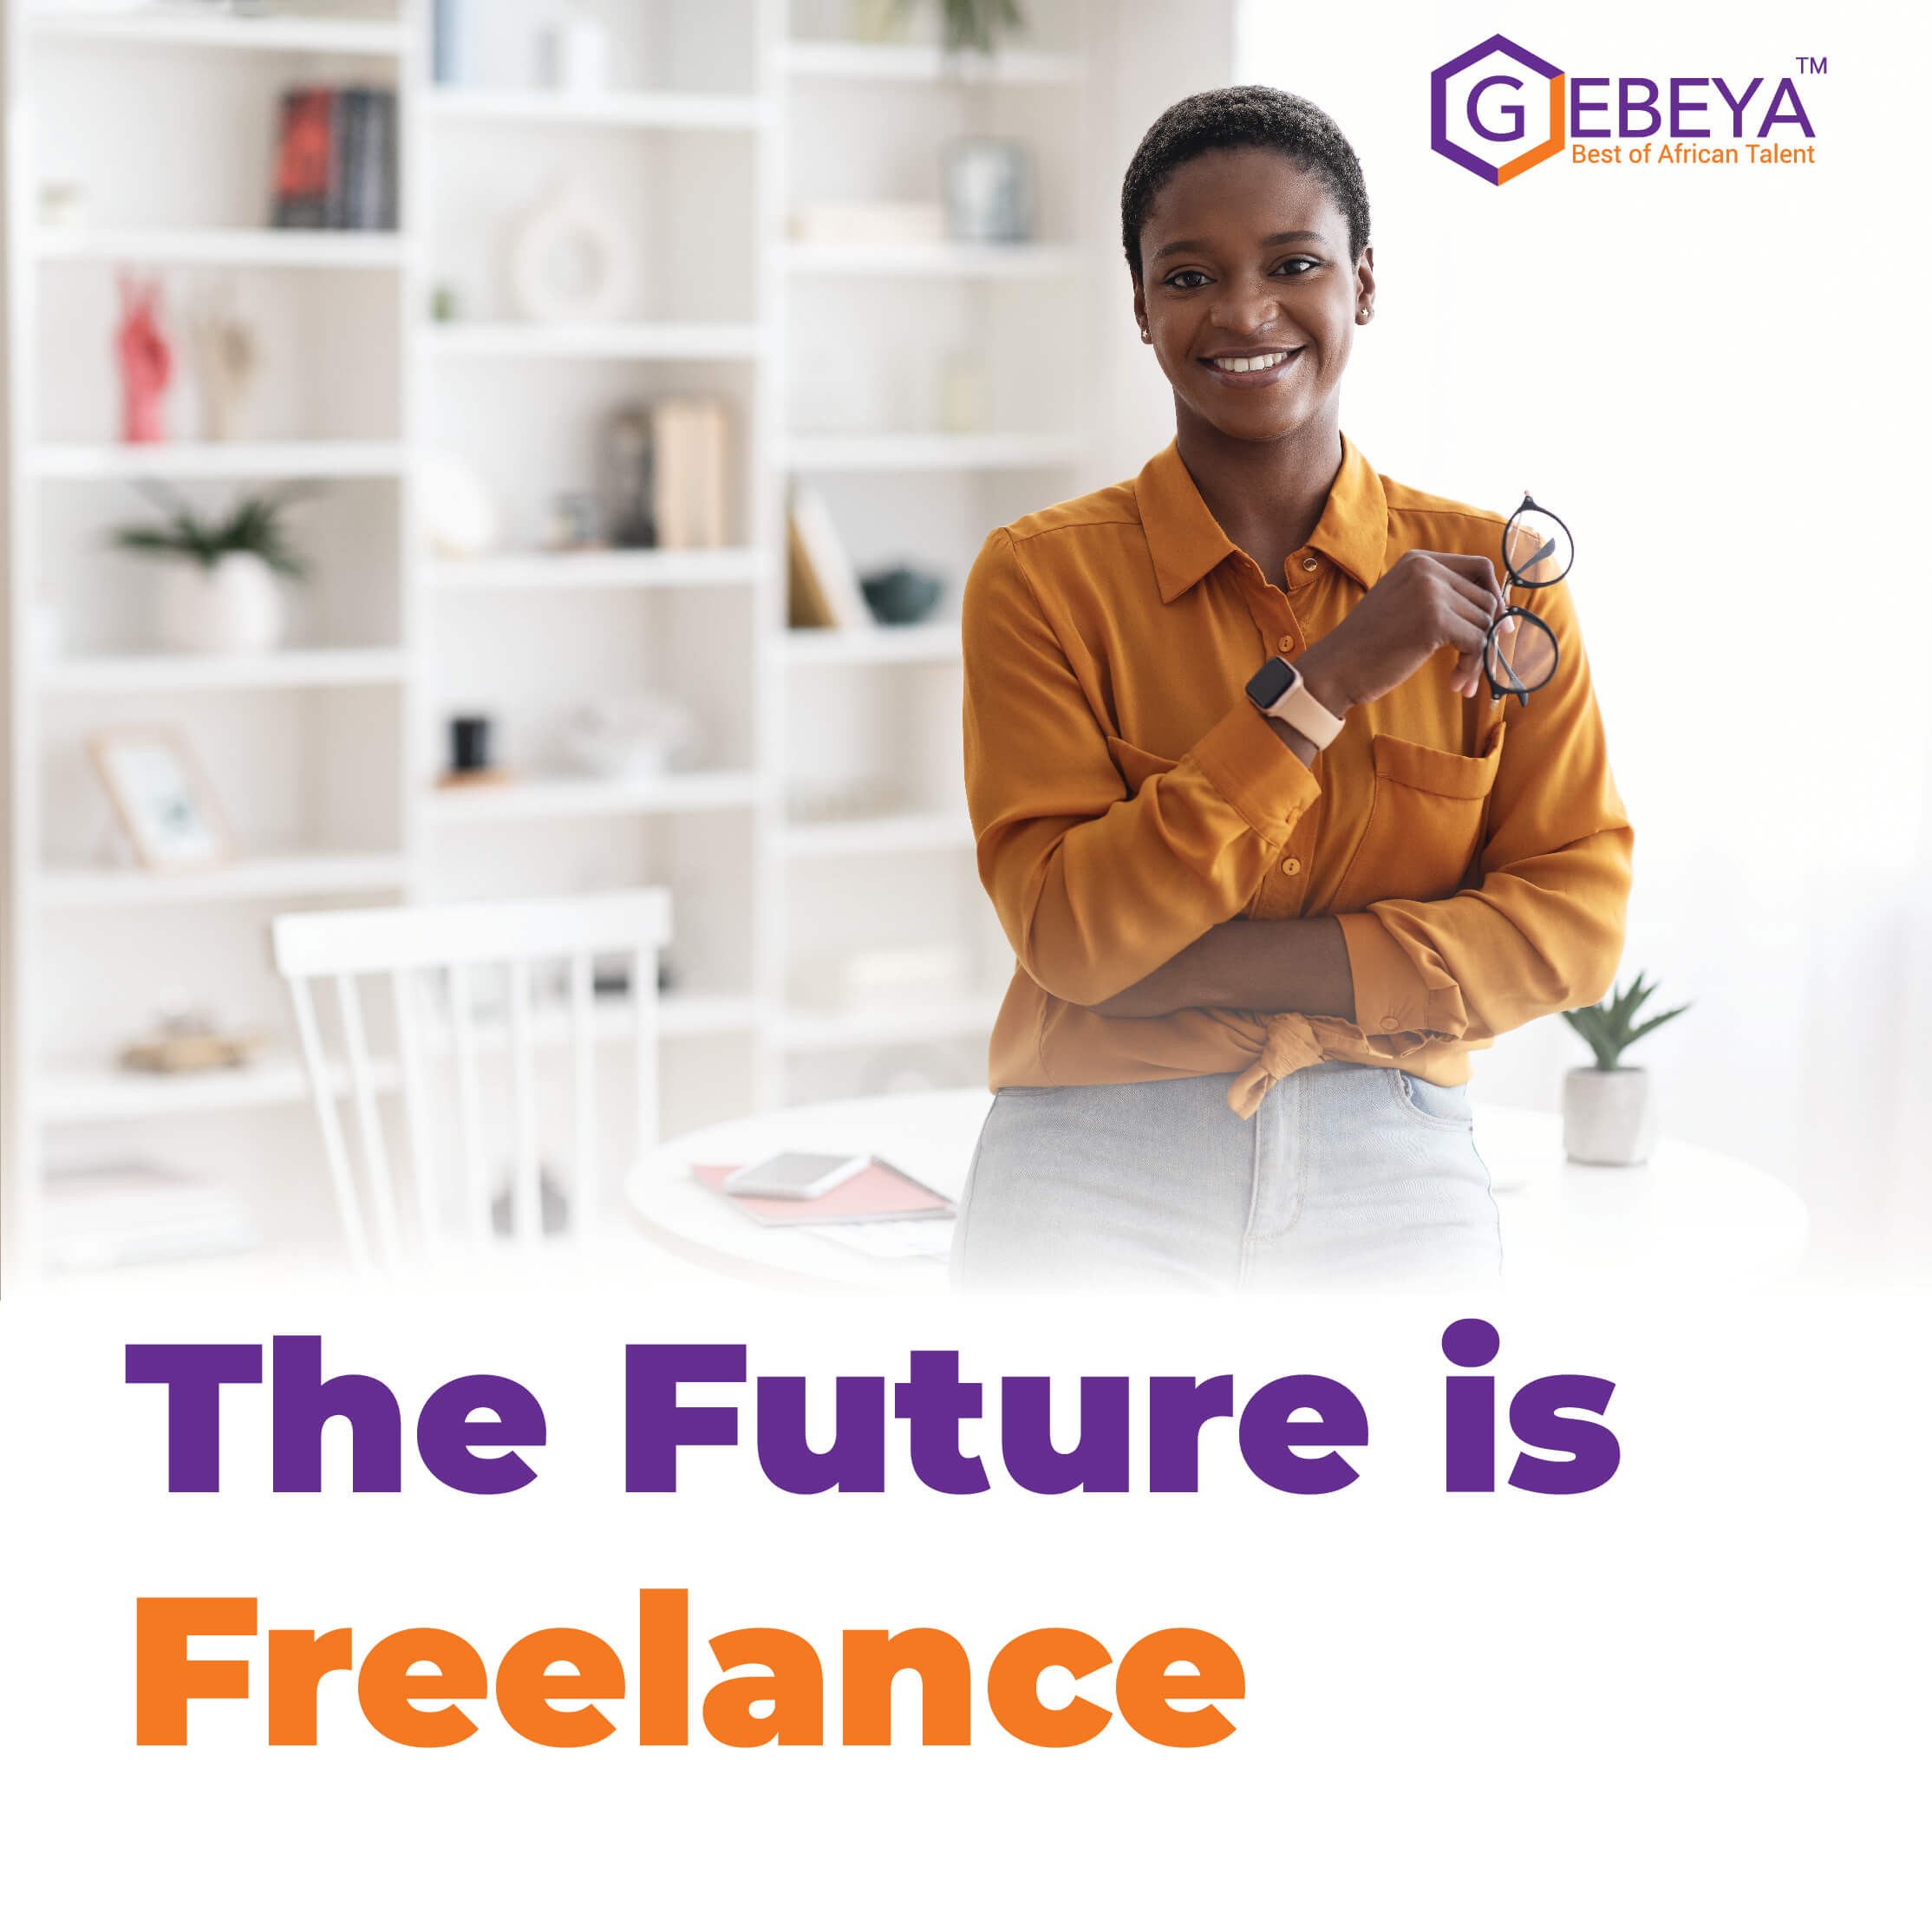 The Future is Freelance